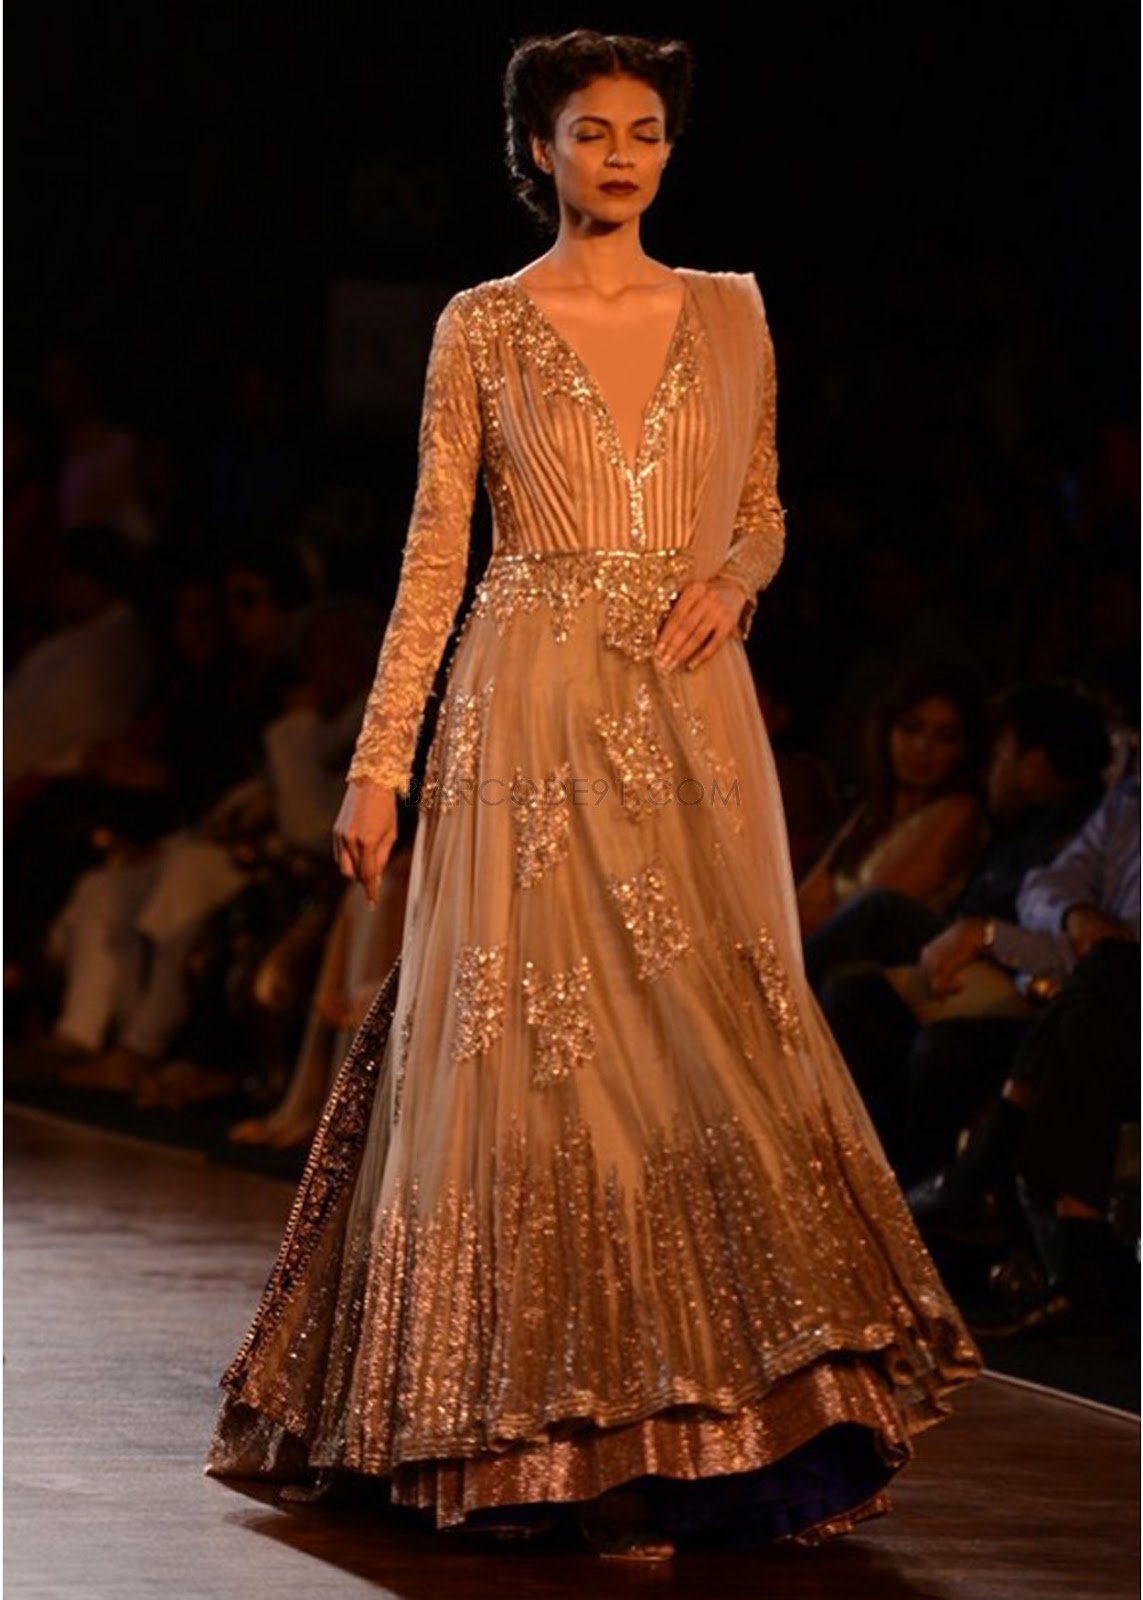 Manish Malhotra Collection at PCJ Delhi Couture Week 2013 - Latest ...